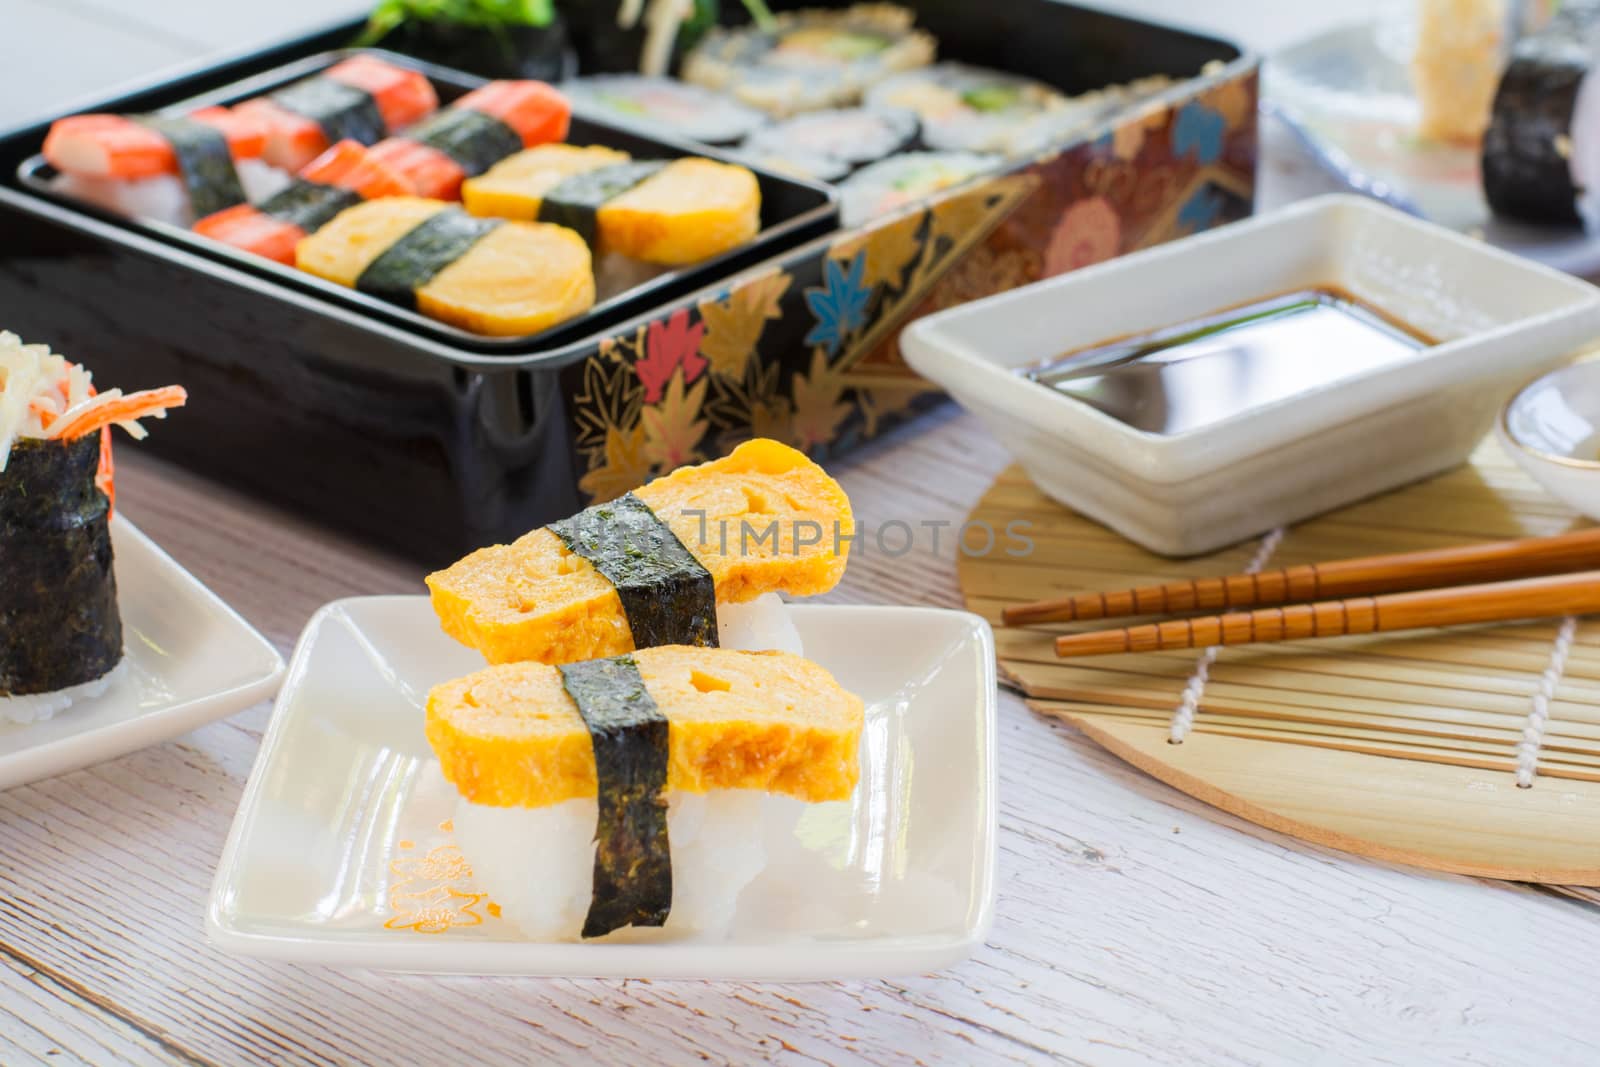 Tamagoyaki sushi or sweet egg on rice and seaweed wrap on square white plate. Delicious japanese food.